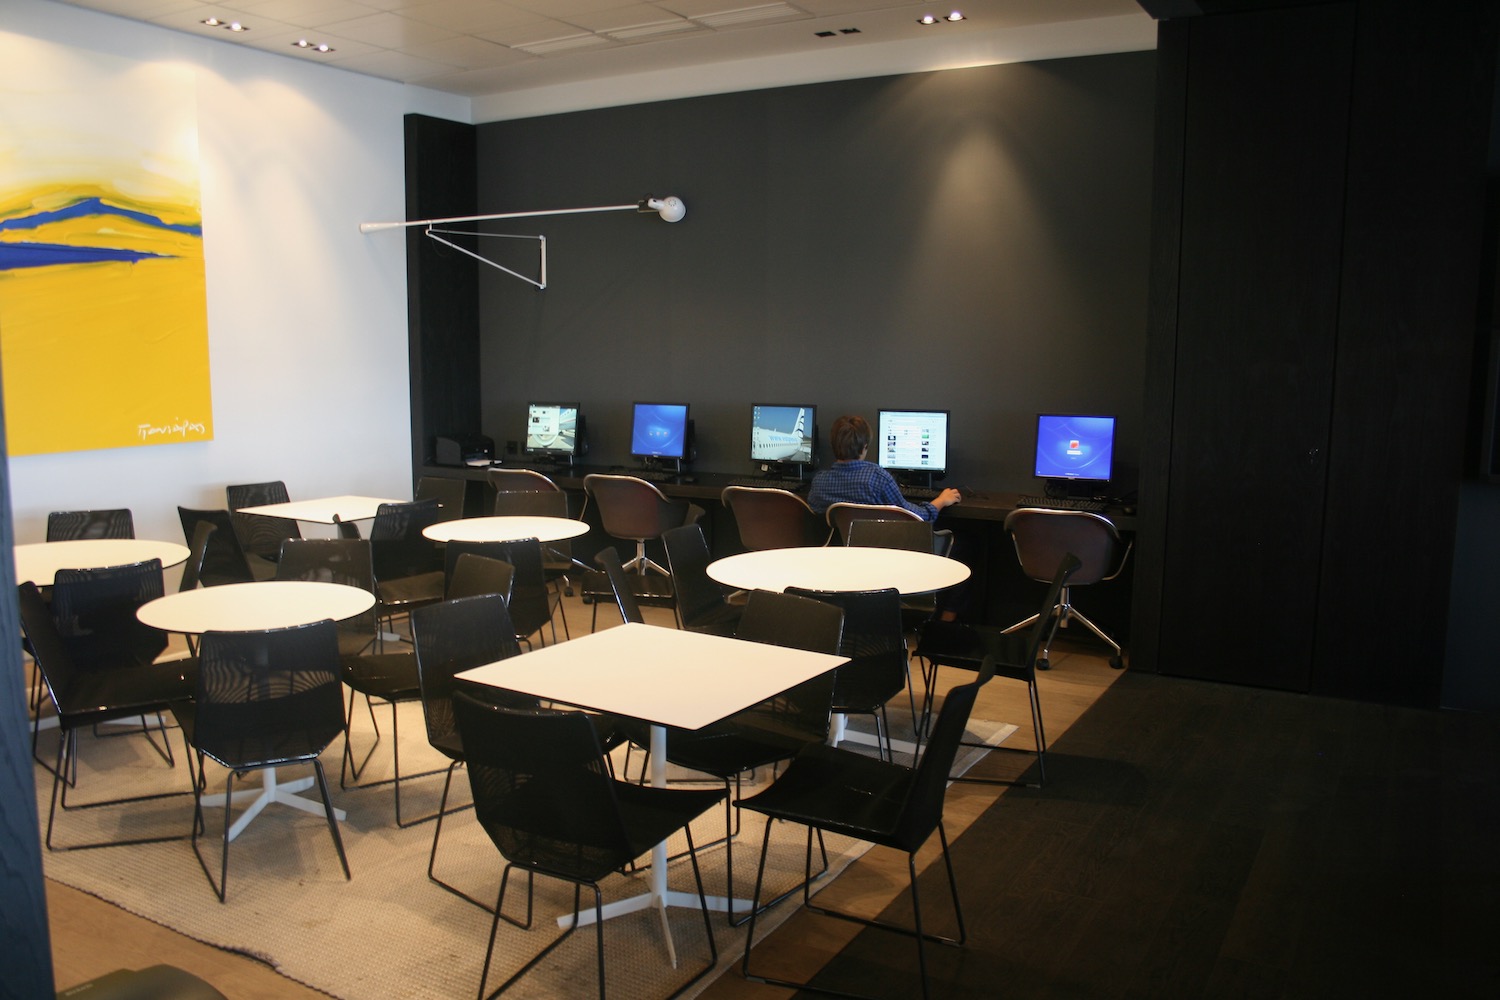 a room with many tables and chairs and a man using computers